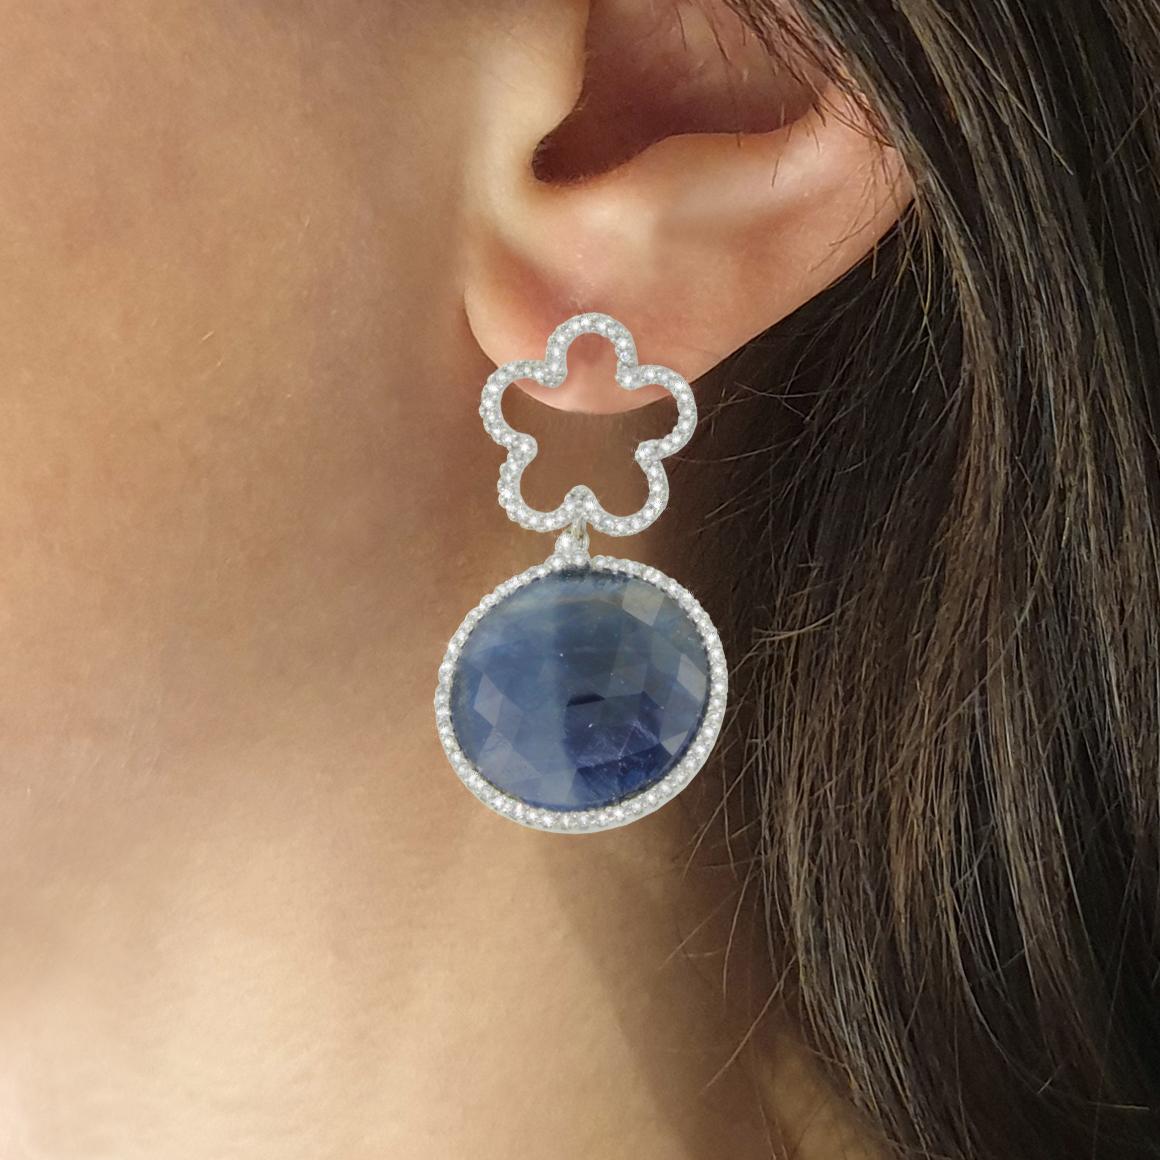  Jewels inspired by the world of nature. Diamond flowers that illuminates the face, Very elegant earrings with Blue Sappire and white diamonds made in Italy by Stanoppi Jewellery since 1948.

Earrings in 18k white gold with Blue Sapphire (round cut,